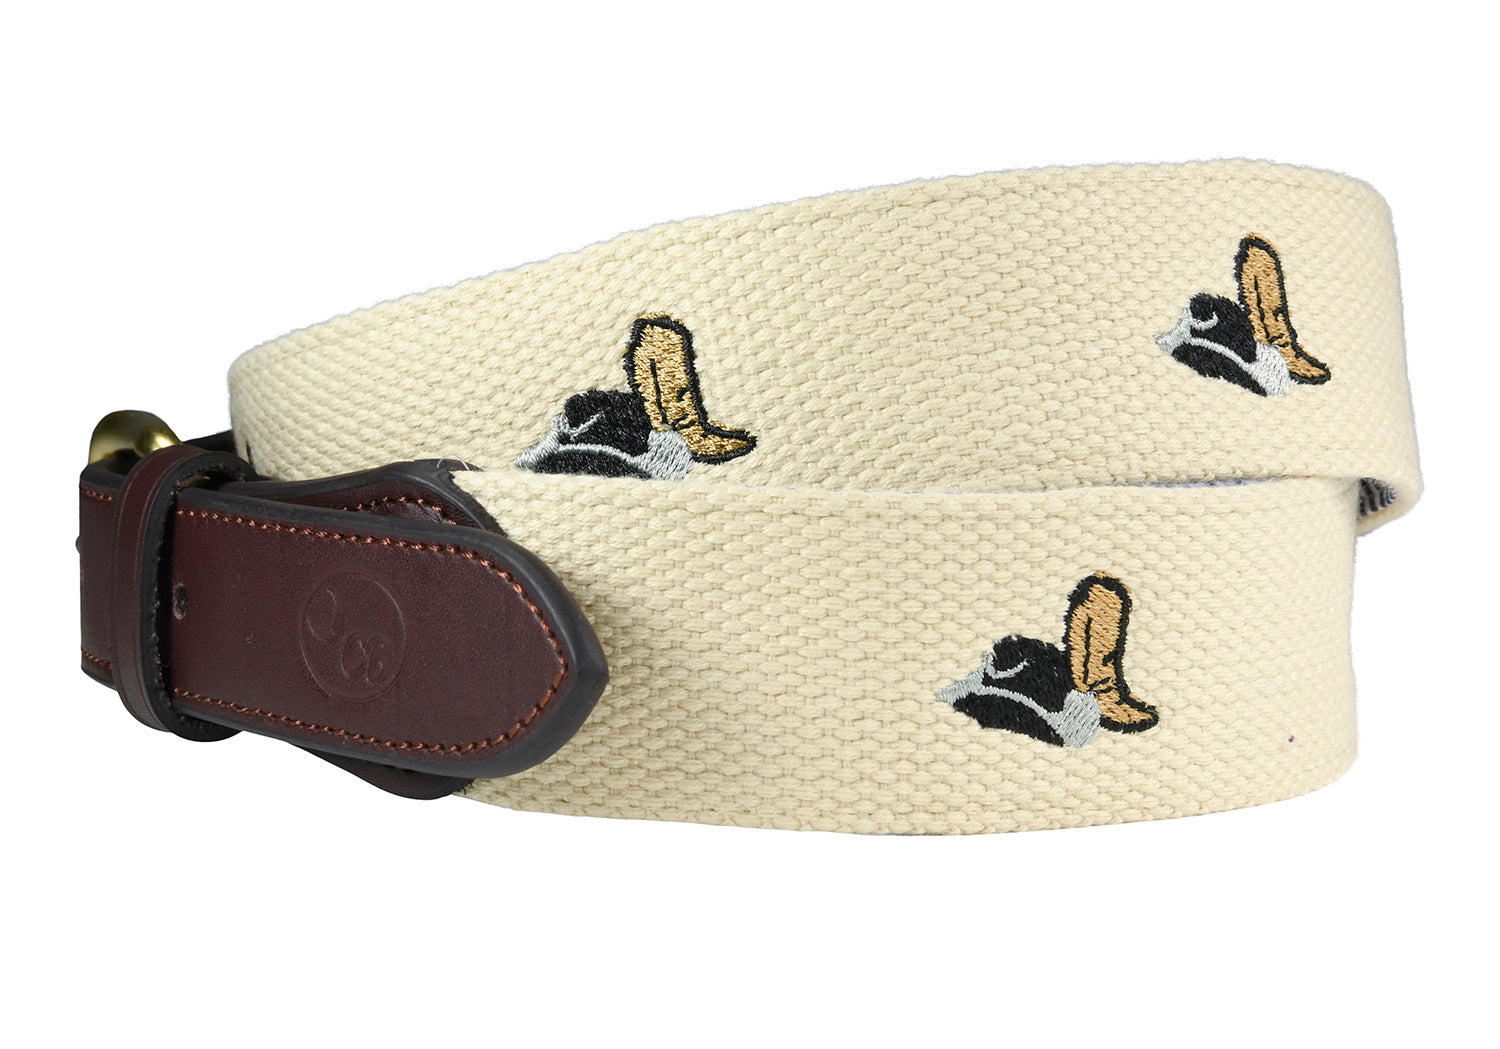 hands-titched needlepoint belts Cowboy Hat and Boot - charlestonbelt.com